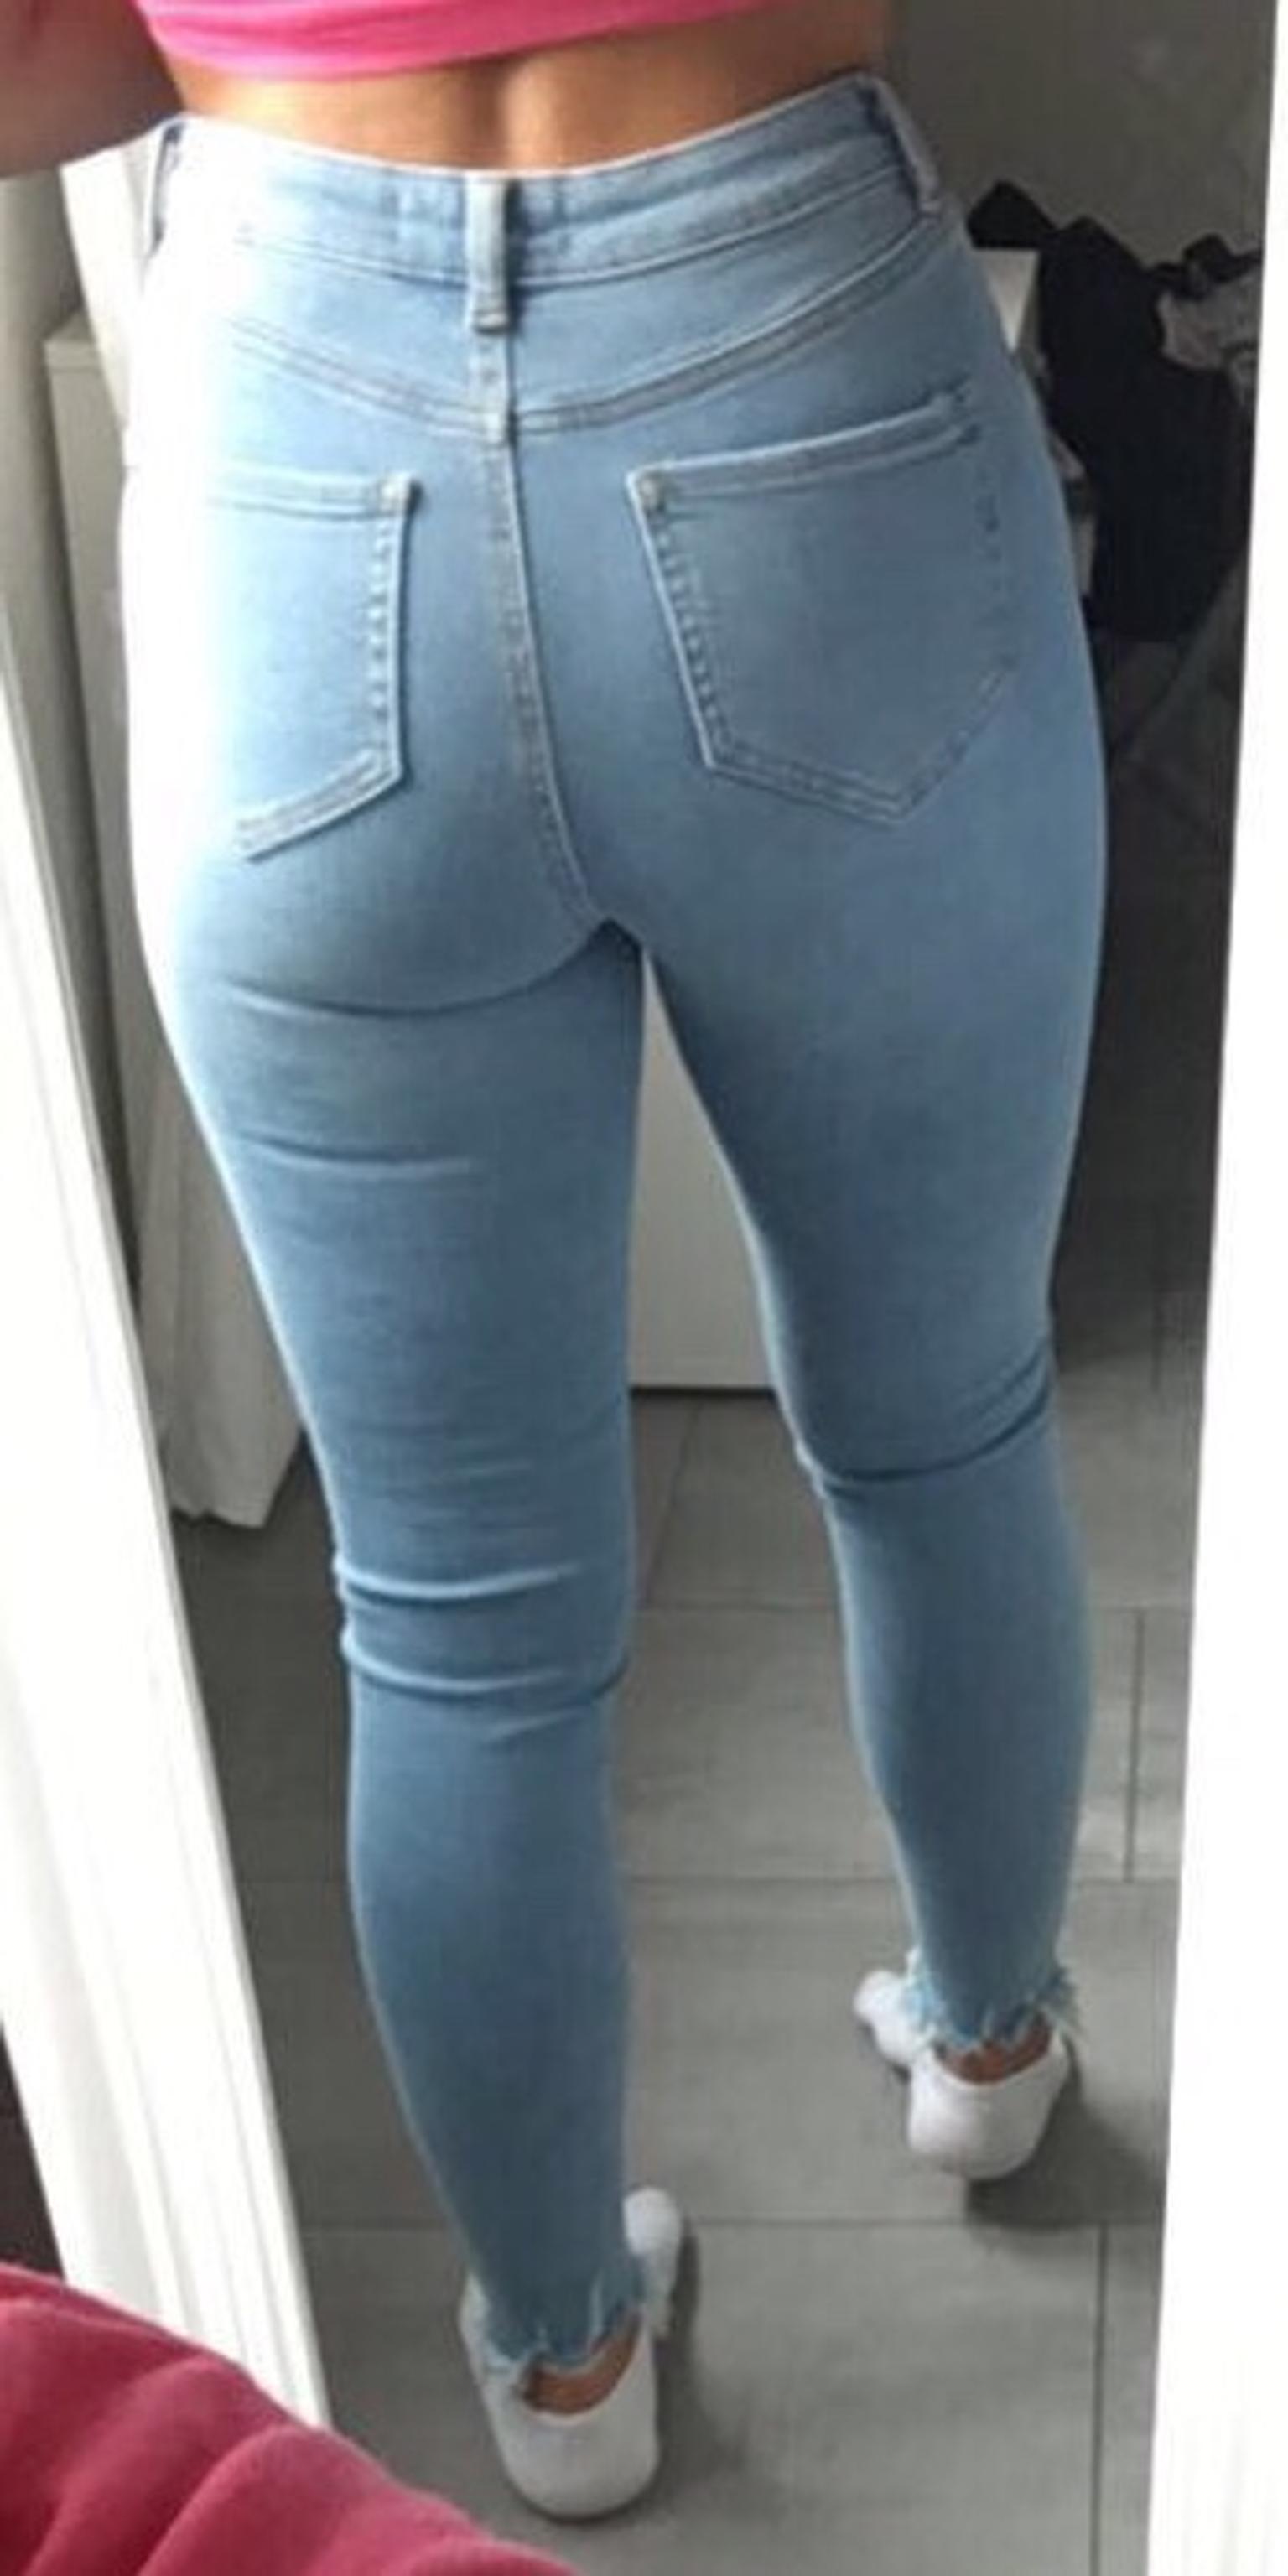 High Waist Jeans In 539 Schwerte For 15 00 For Sale Shpock